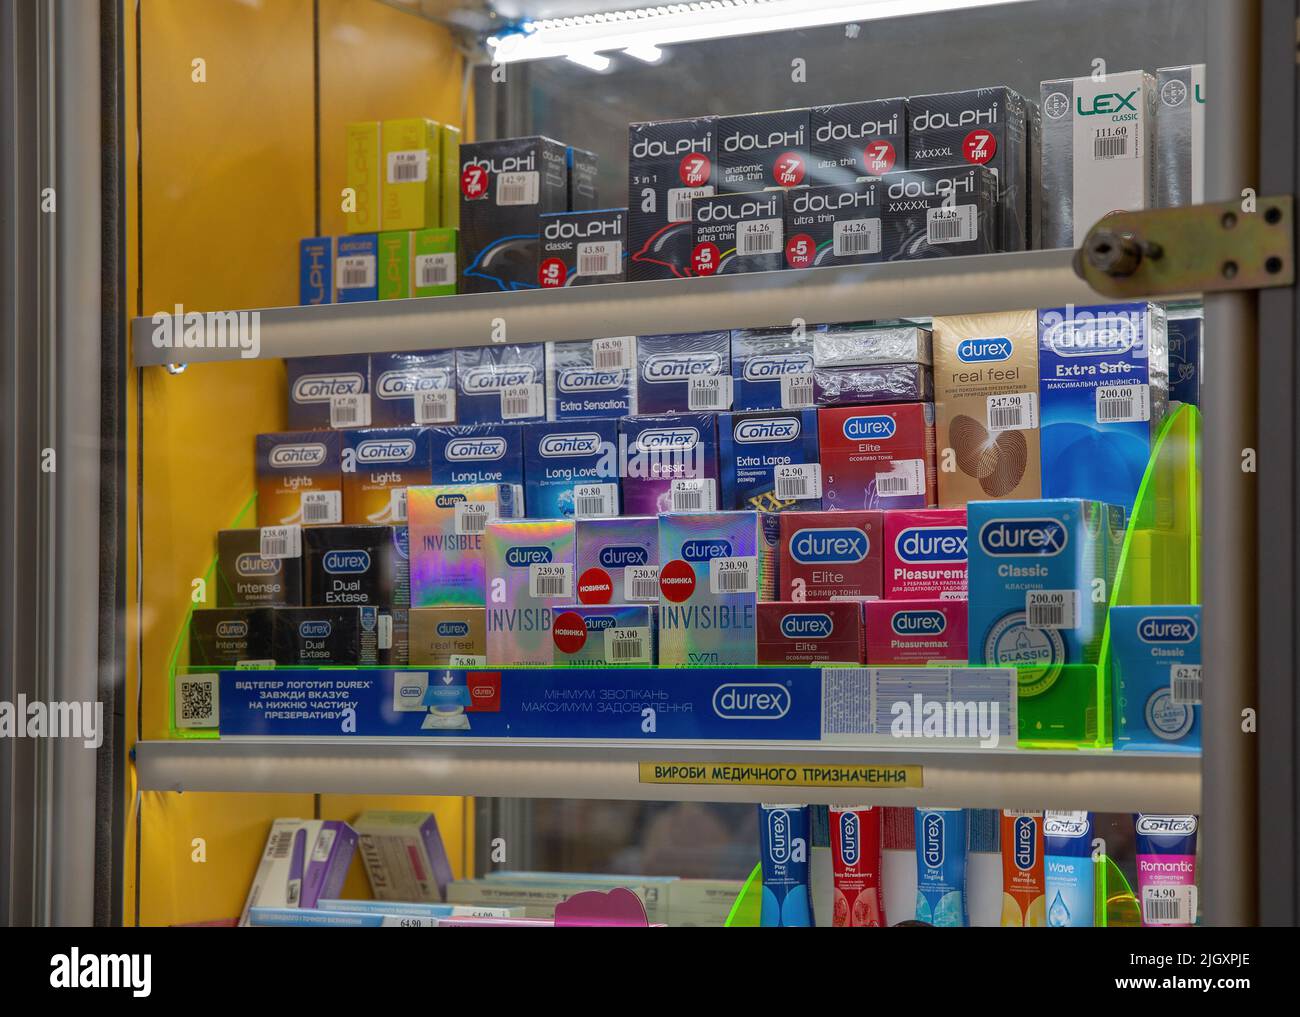 Mariupol, Ukraine - July 15, 2021: Pharmacy shelves full of different condoms products closeup. Boxes arranged in windows shelves. Stock Photo